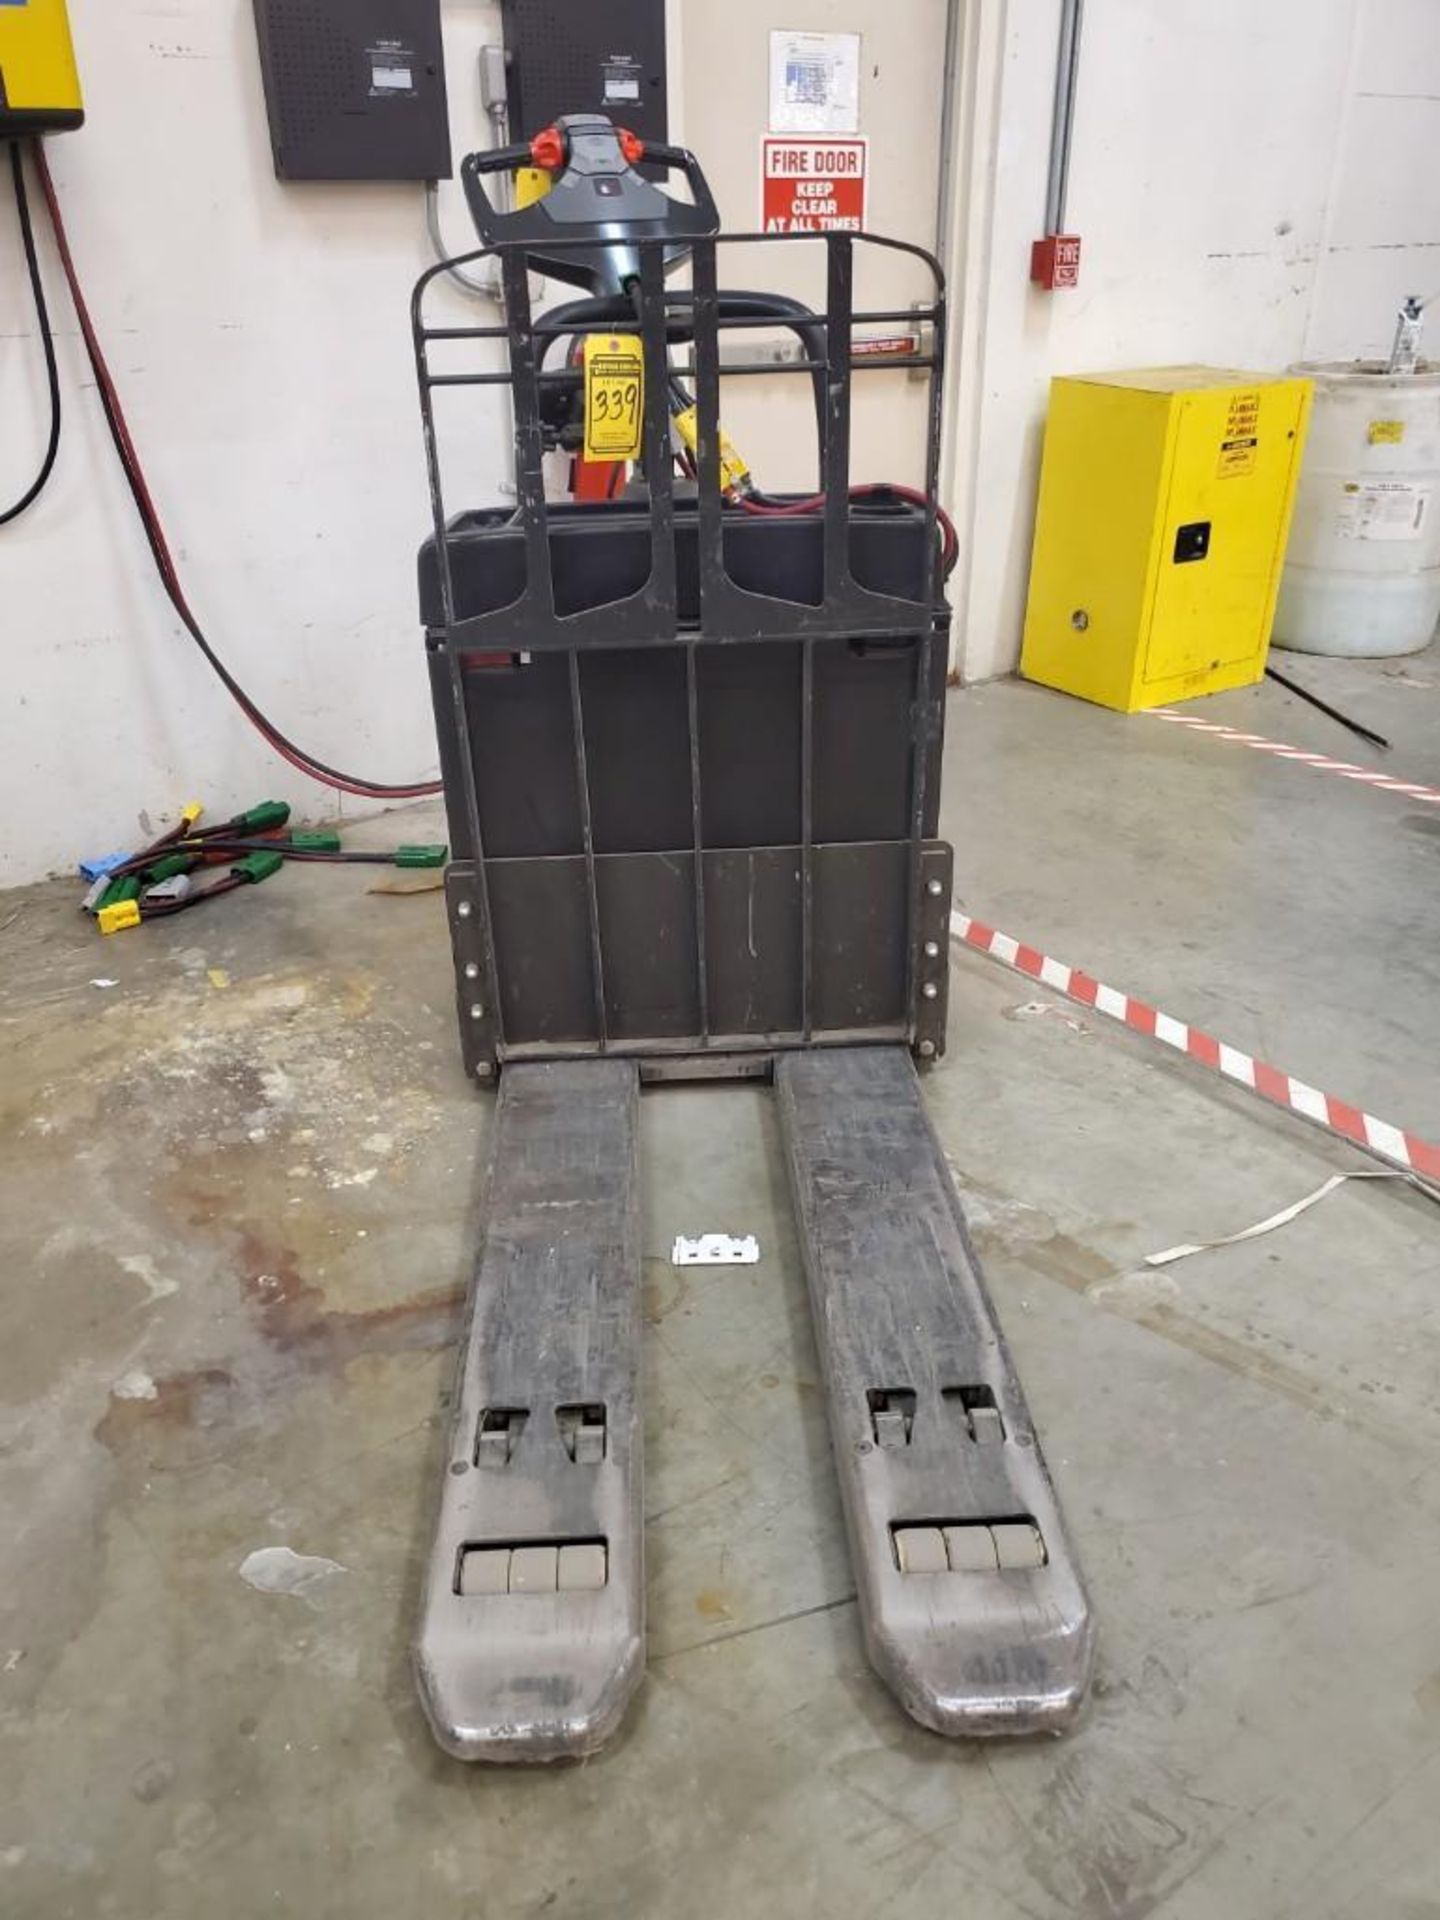 2012 RAYMOND 6,000 LB. CAPACITY ELECTRIC PALLET TRUCK; MODEL 8410, S/N 841-12-12011, WITH IWAREHOUSE